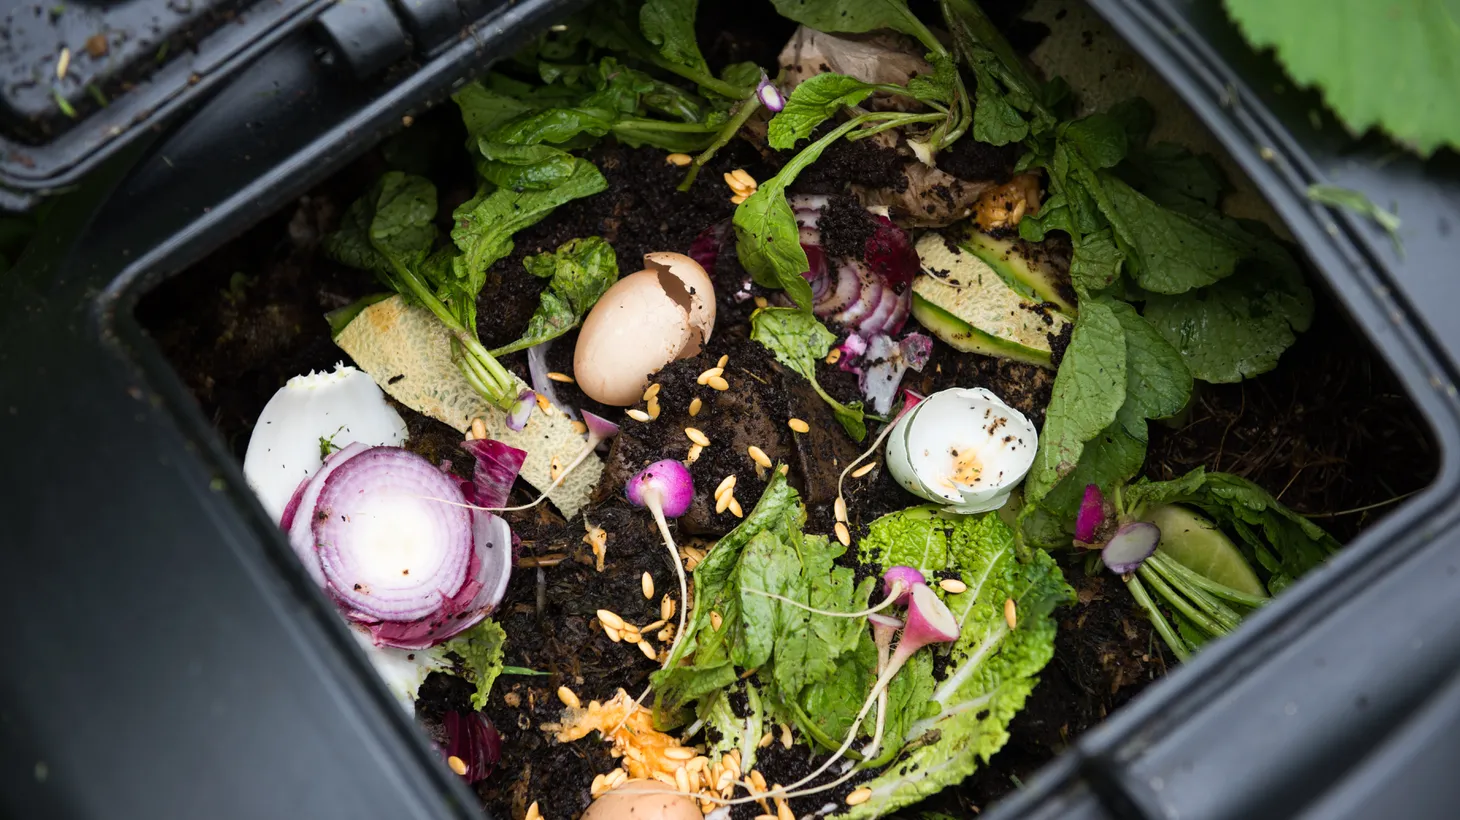 As of January 2023, all California residents and businesses are required to compost.